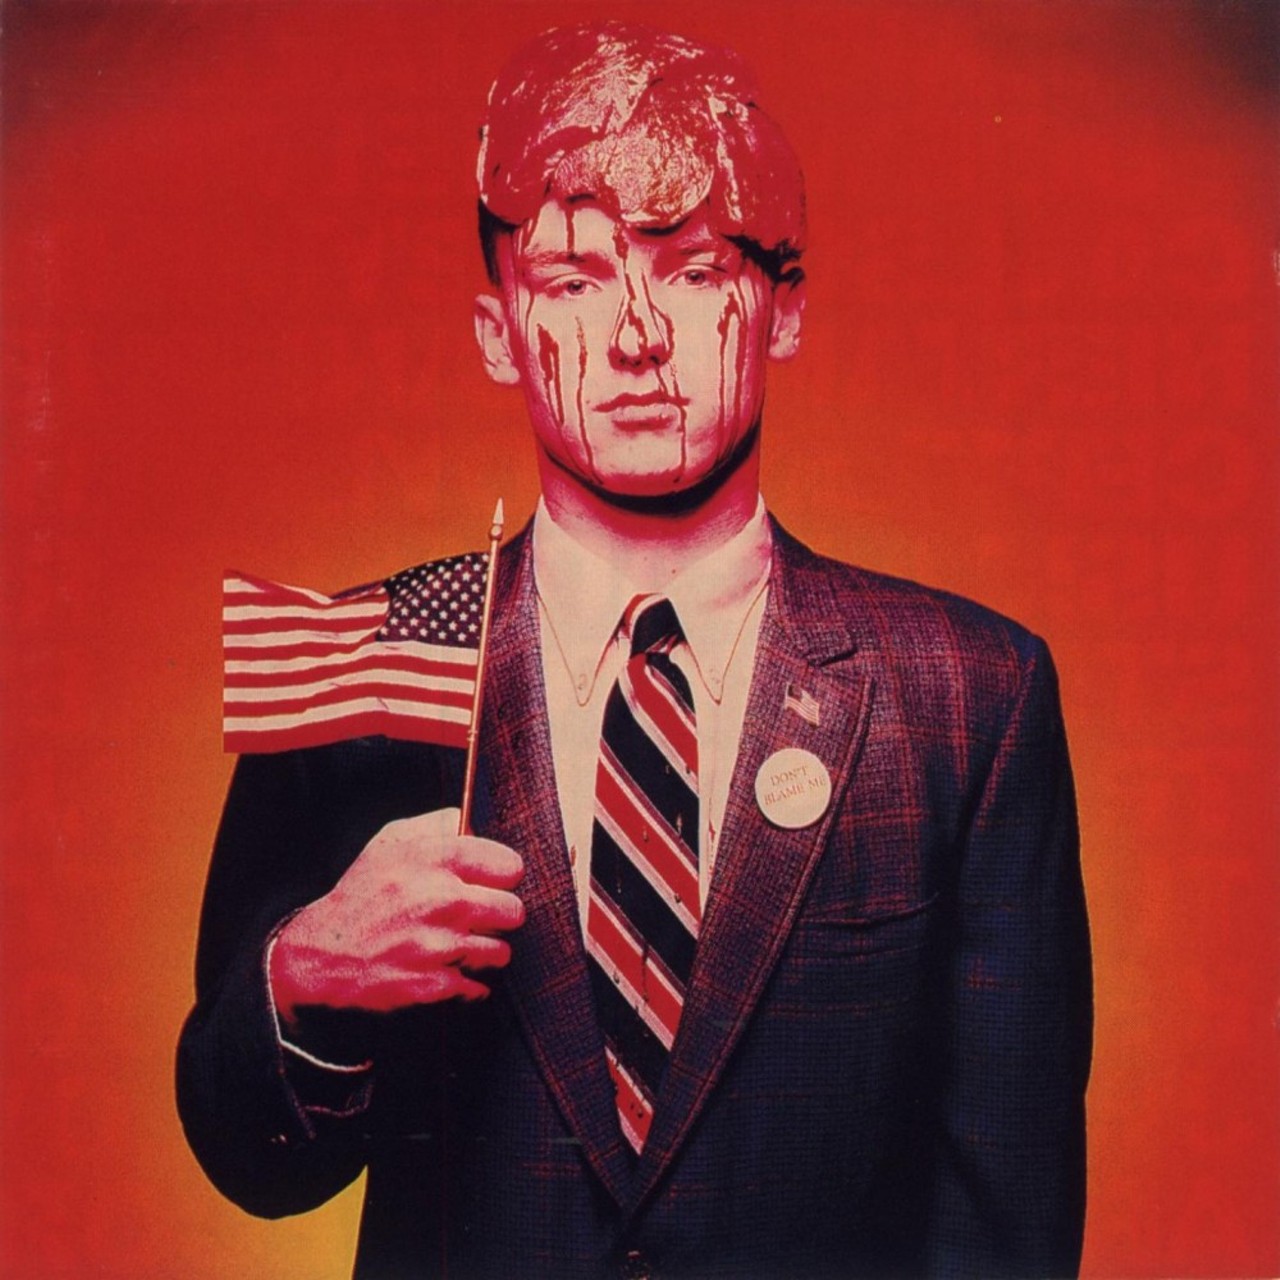 Ministry - Filth Pig (1996)
Ministry's sixth studio album, Filth Pig was supposedly derived from a statement made in the British House of Parliament where singer Al Jourgensen was described by Teddy Taylor as a "filthy pig." Regardless, the album curiously features the American flag, not the British one.